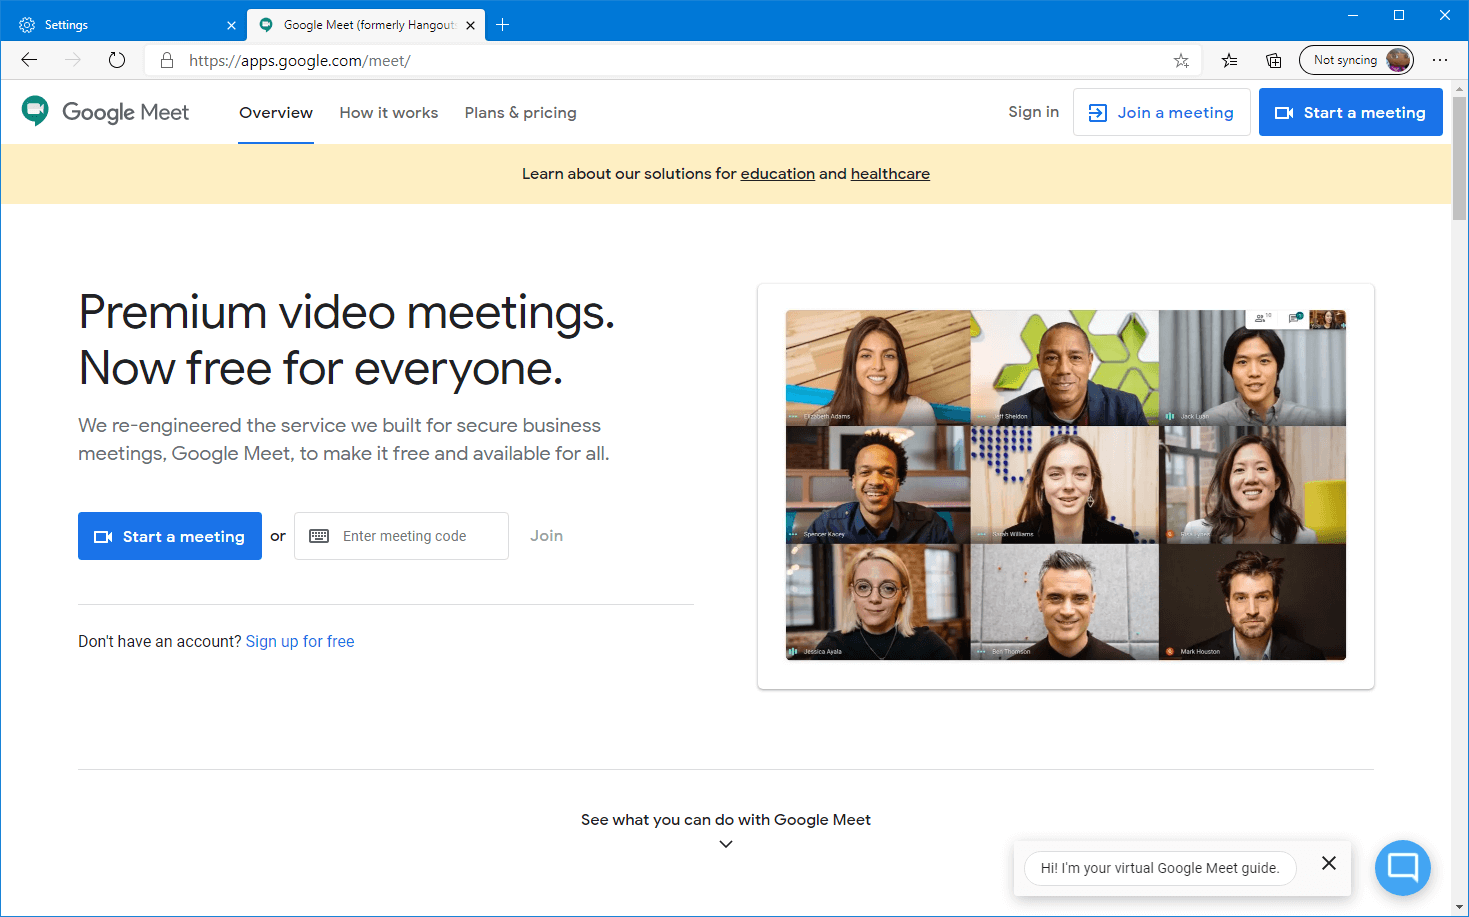 Home page of Google Meet